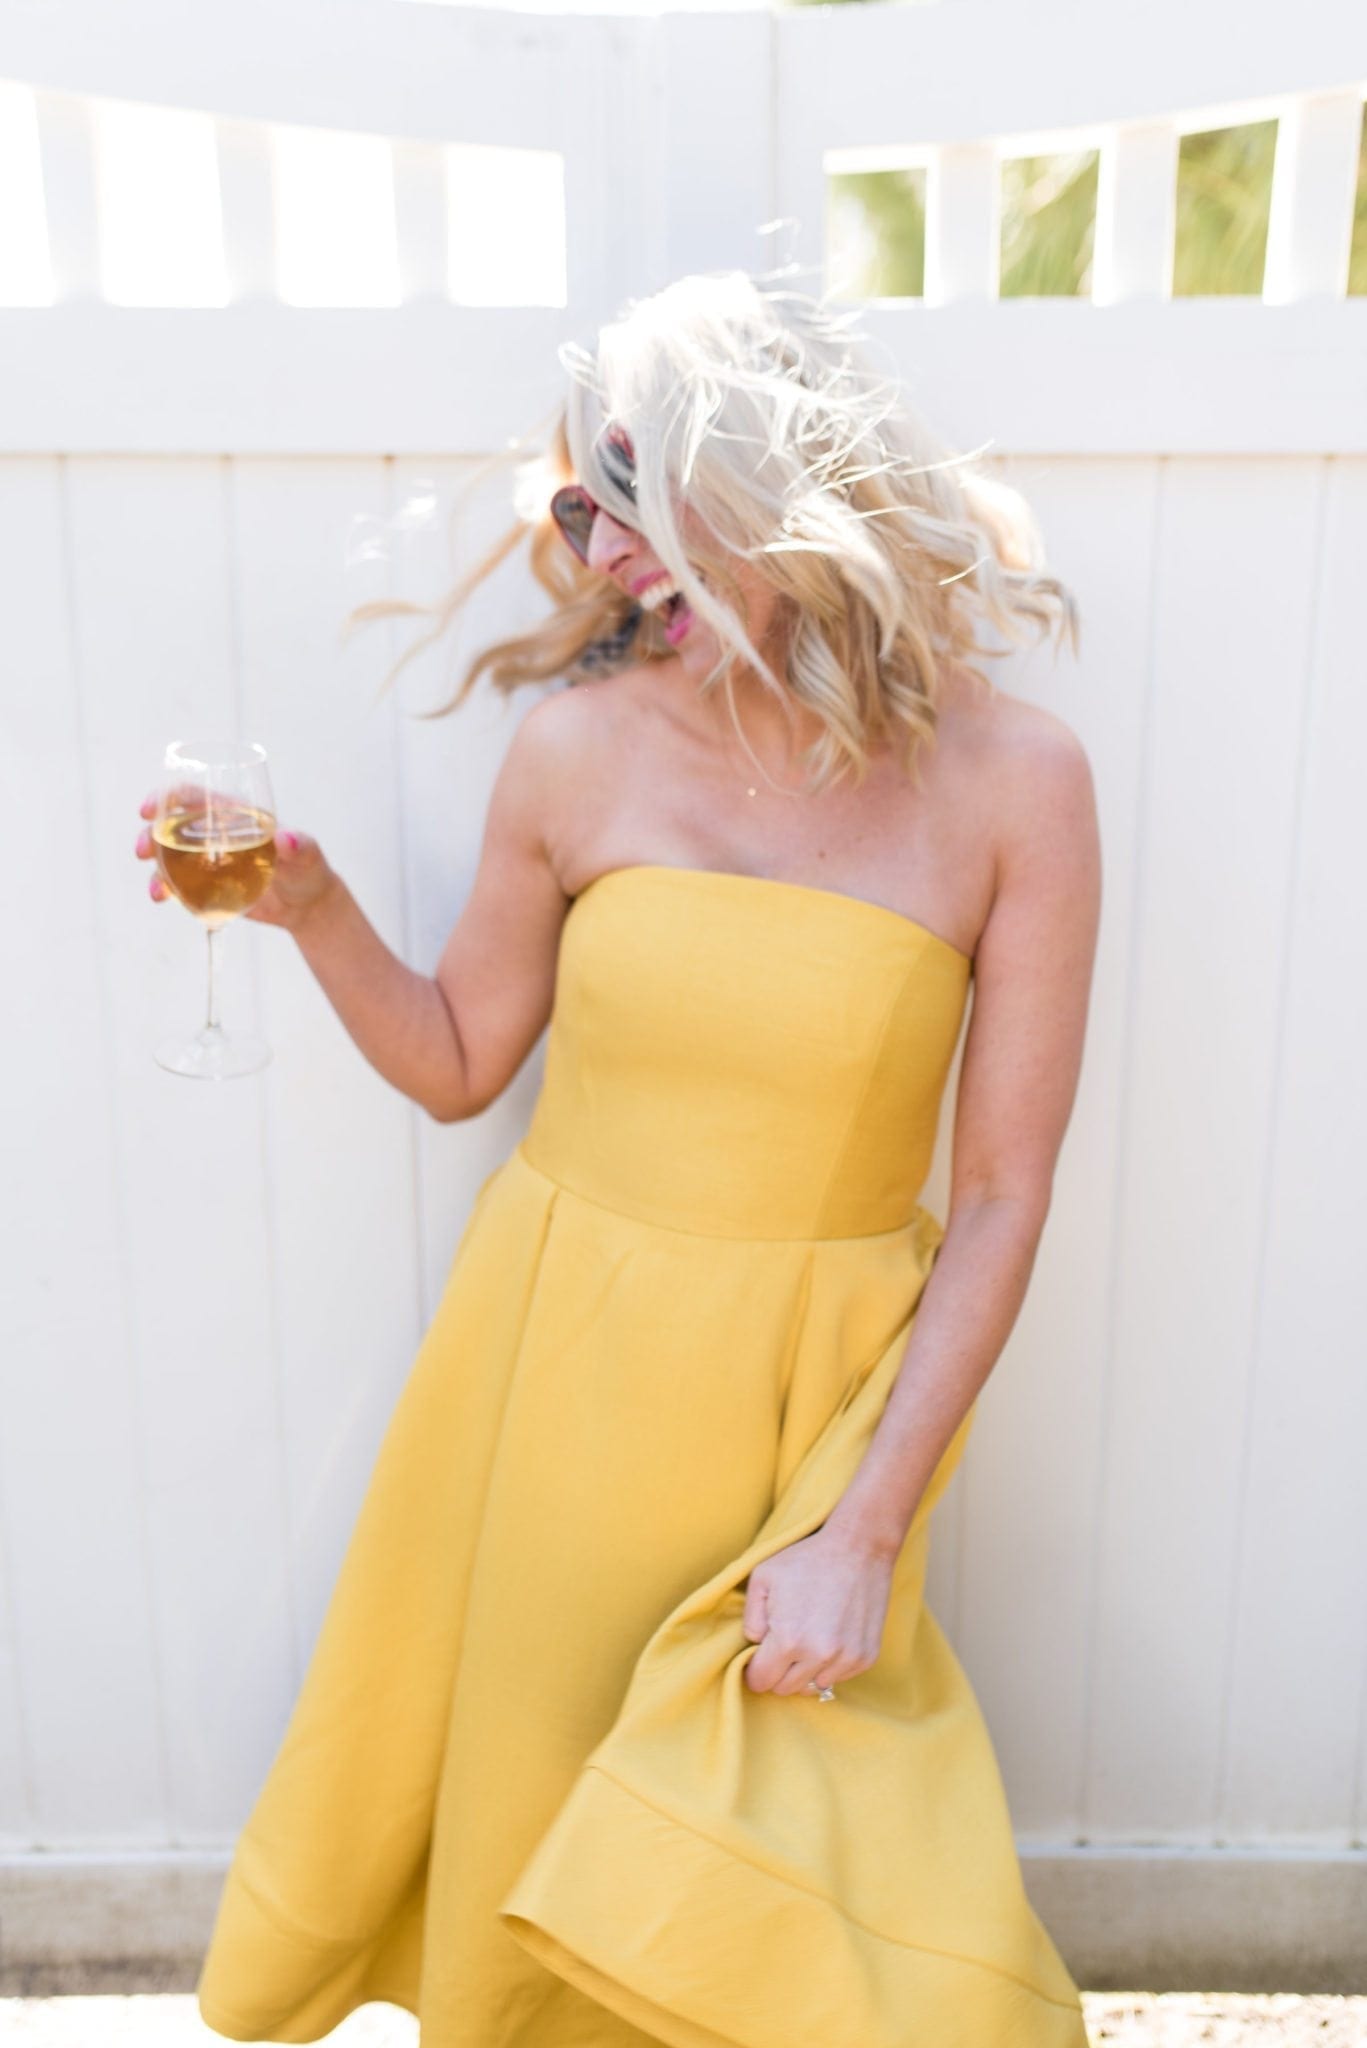 Strapless Yellow dress with full skirt. Red sunglasses. My long hair (and my sisters!) stays healthy thanks to the the T3 curling iron, T3 straightener, and T3 curling wand!